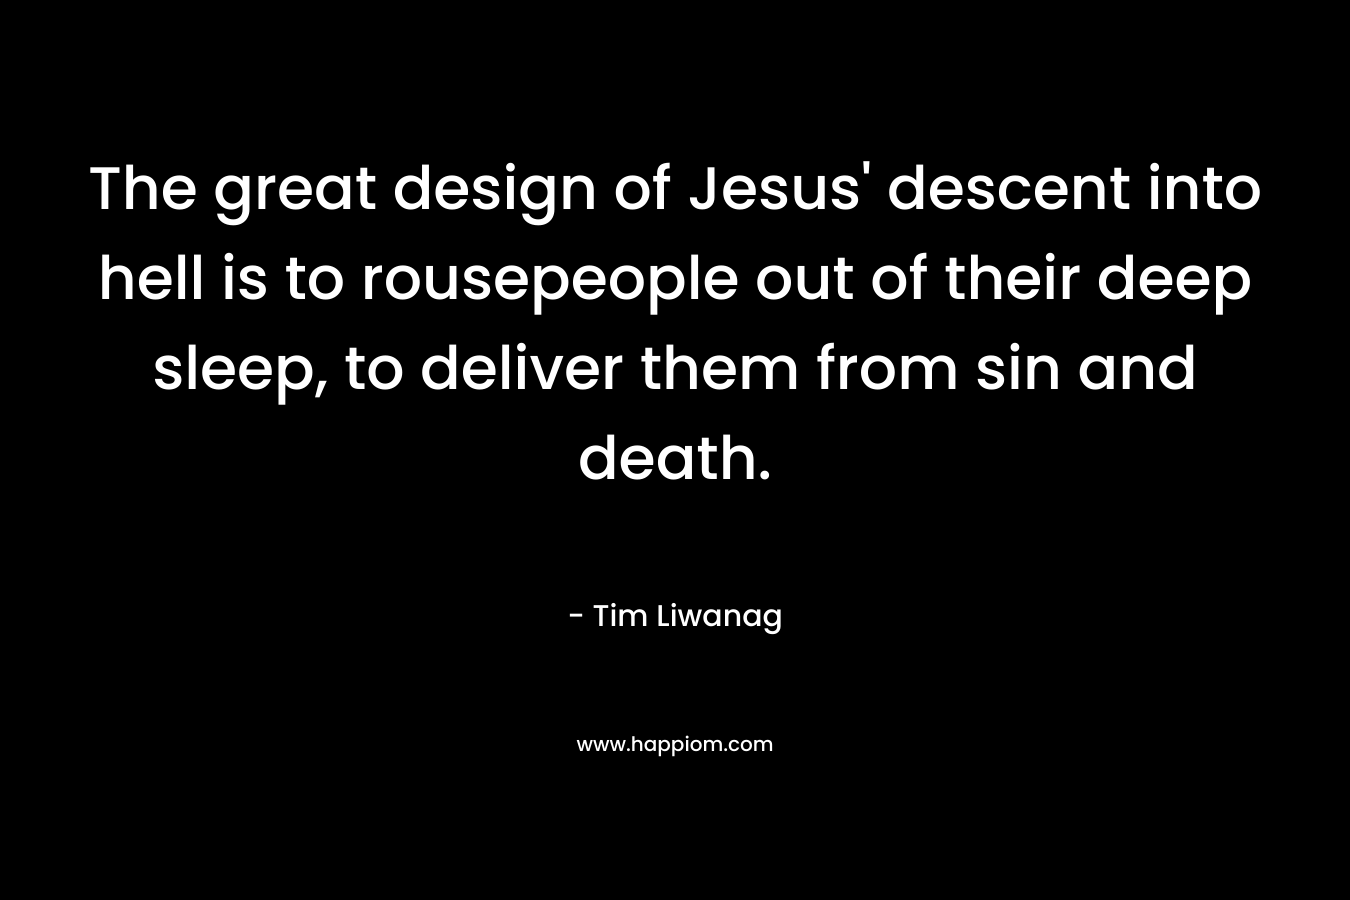 The great design of Jesus’ descent into hell is to rousepeople out of their deep sleep, to deliver them from sin and death. – Tim Liwanag